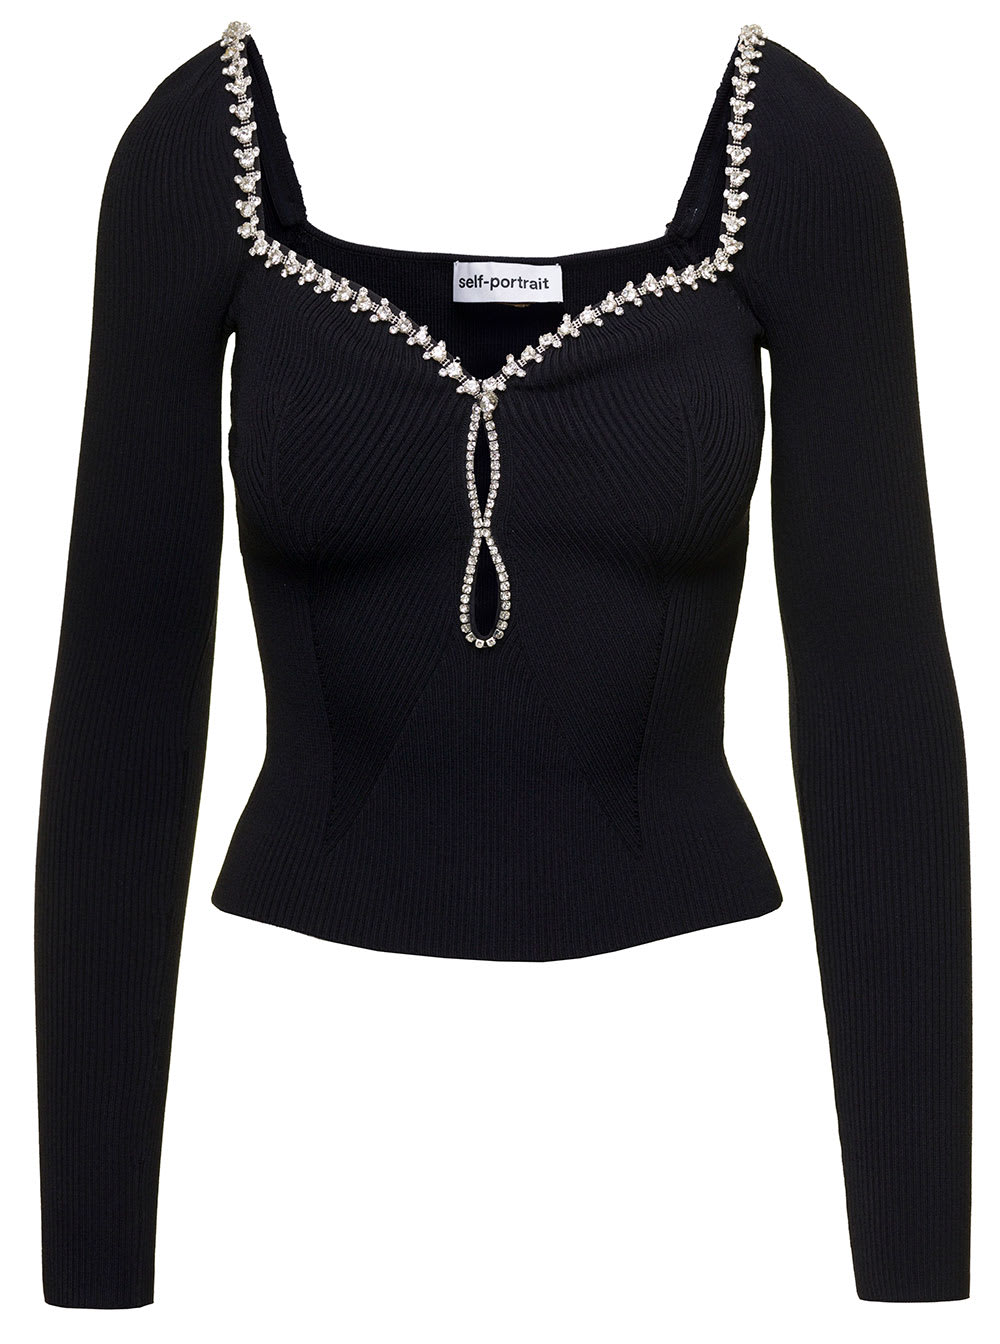 SELF-PORTRAIT BLACK LONG-SLEEVED TOP WITH SWEETHEART NECK AND RHINESTONES IN VISCOSE BLEND WOMAN